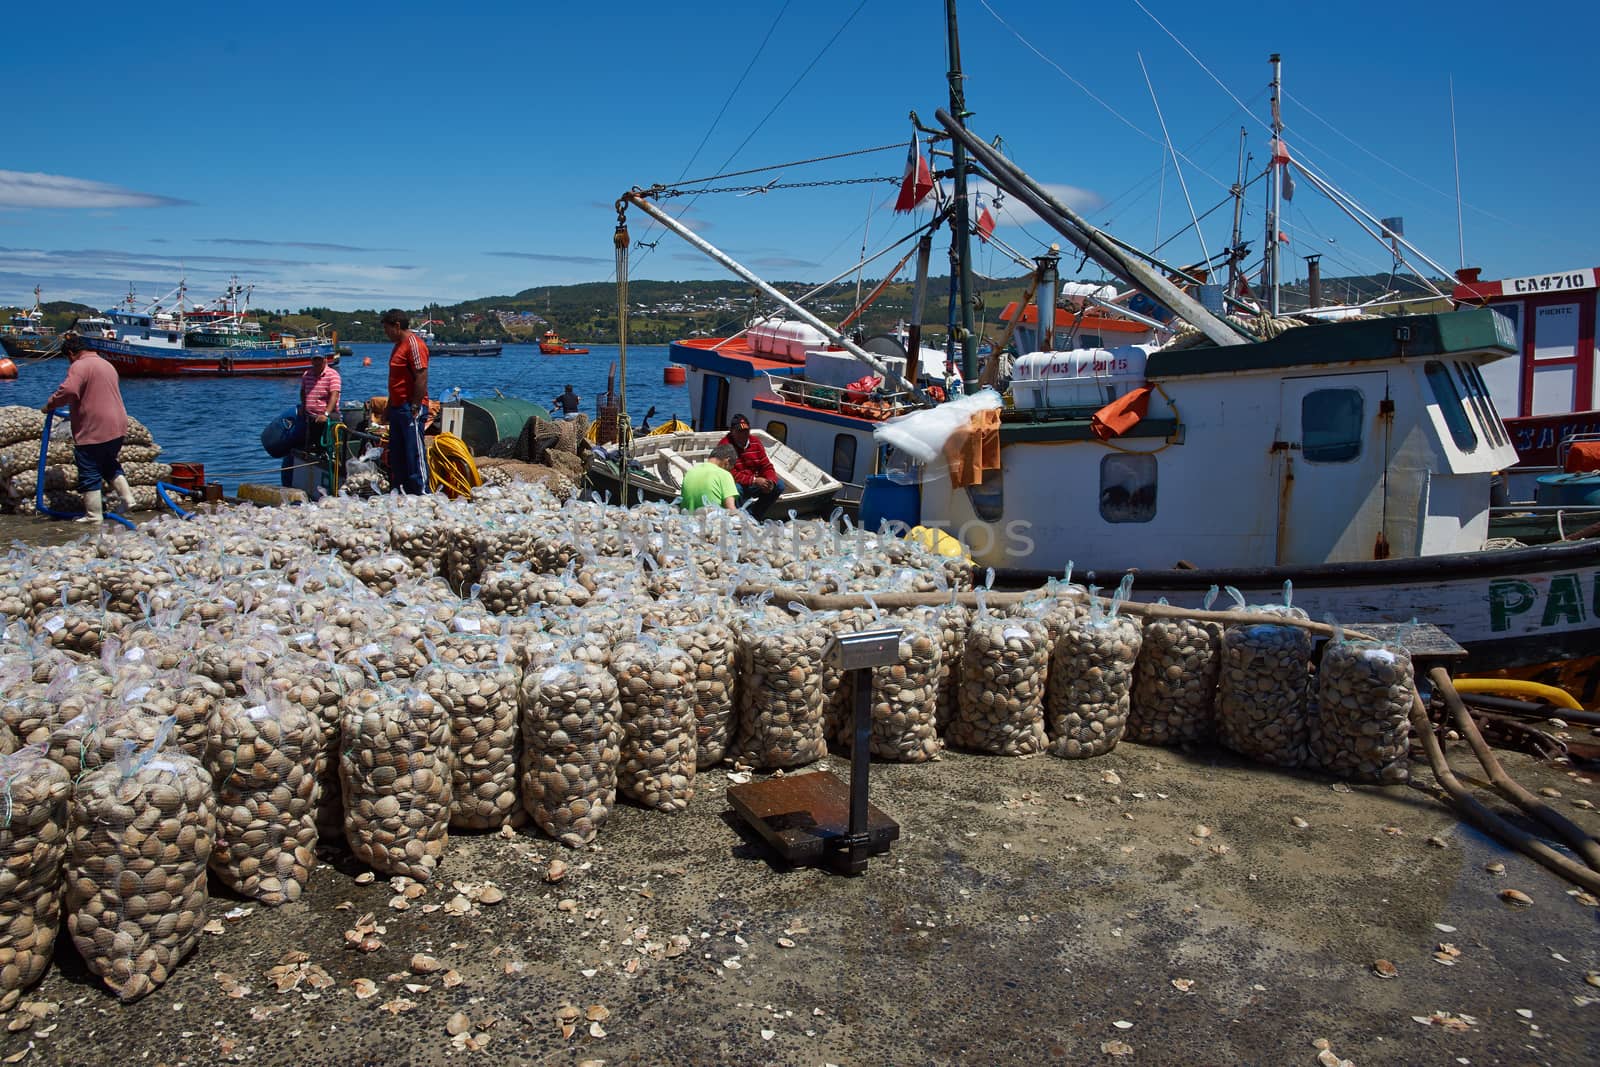 Sacks of Littleneck Clams (Ameghinomya antiqua) being landed from a fishing boat on to a jetty at the fishing port of Quellon on the island of Chiloe in Chile.